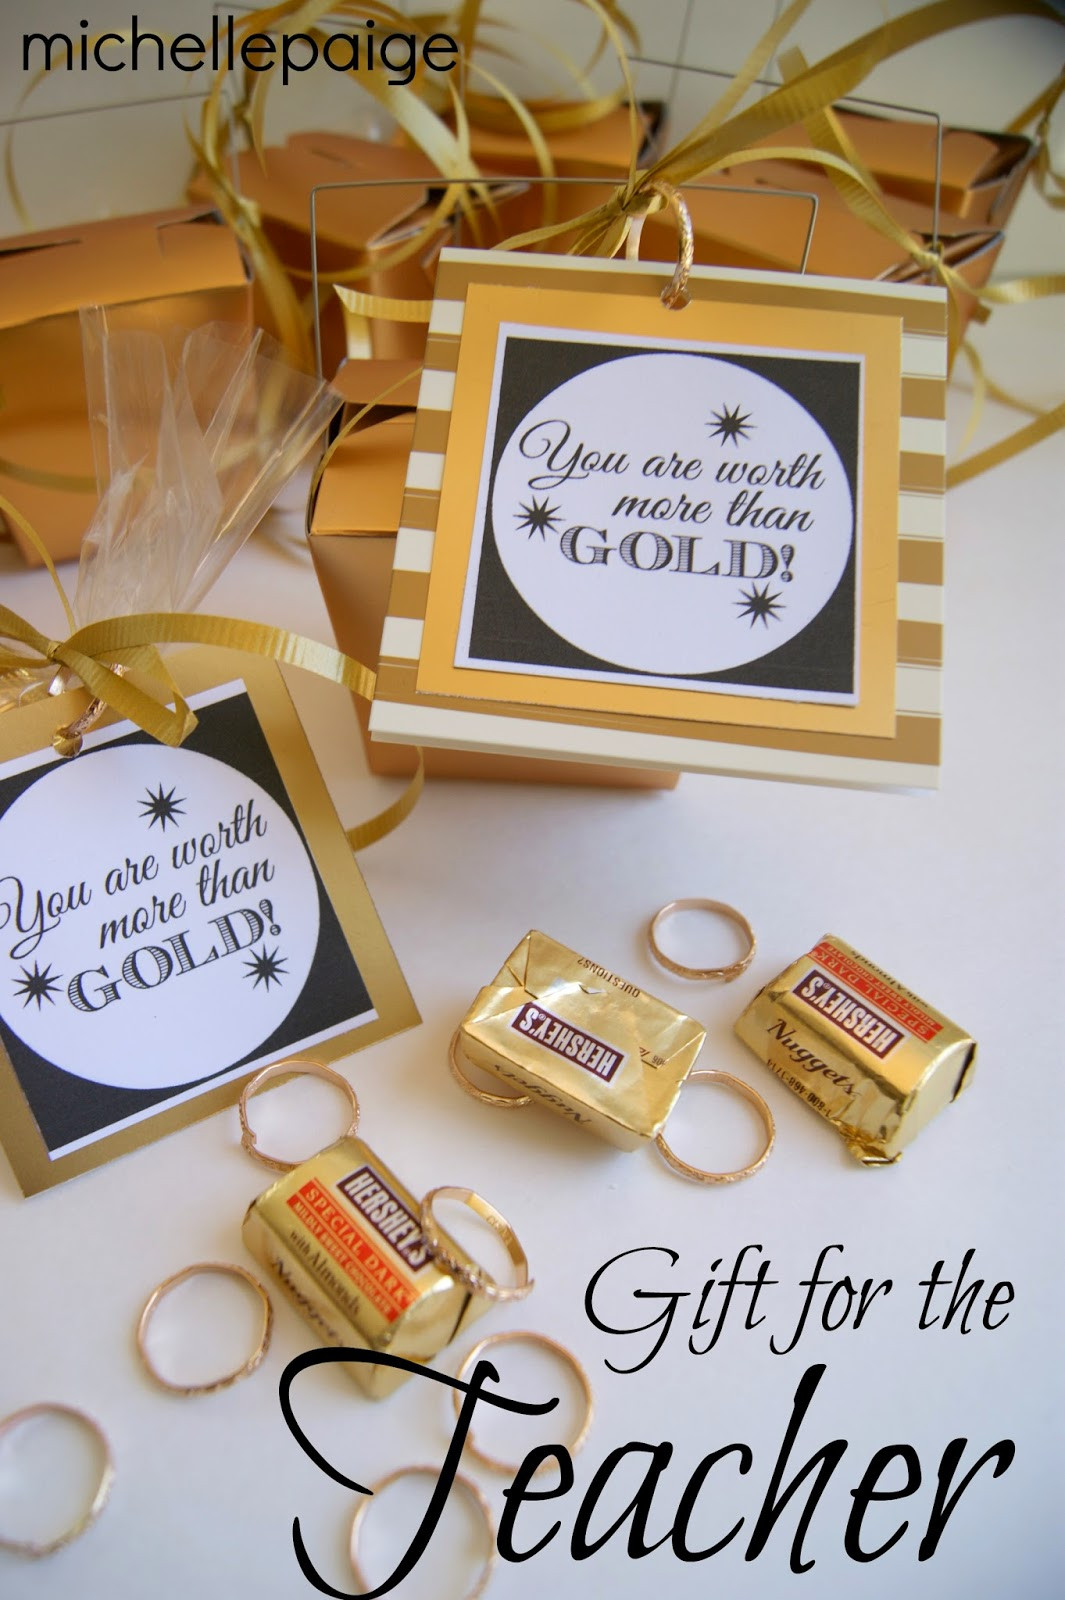 Employee Thank You Gift Ideas
 michelle paige blogs Worth More than Gold Teacher